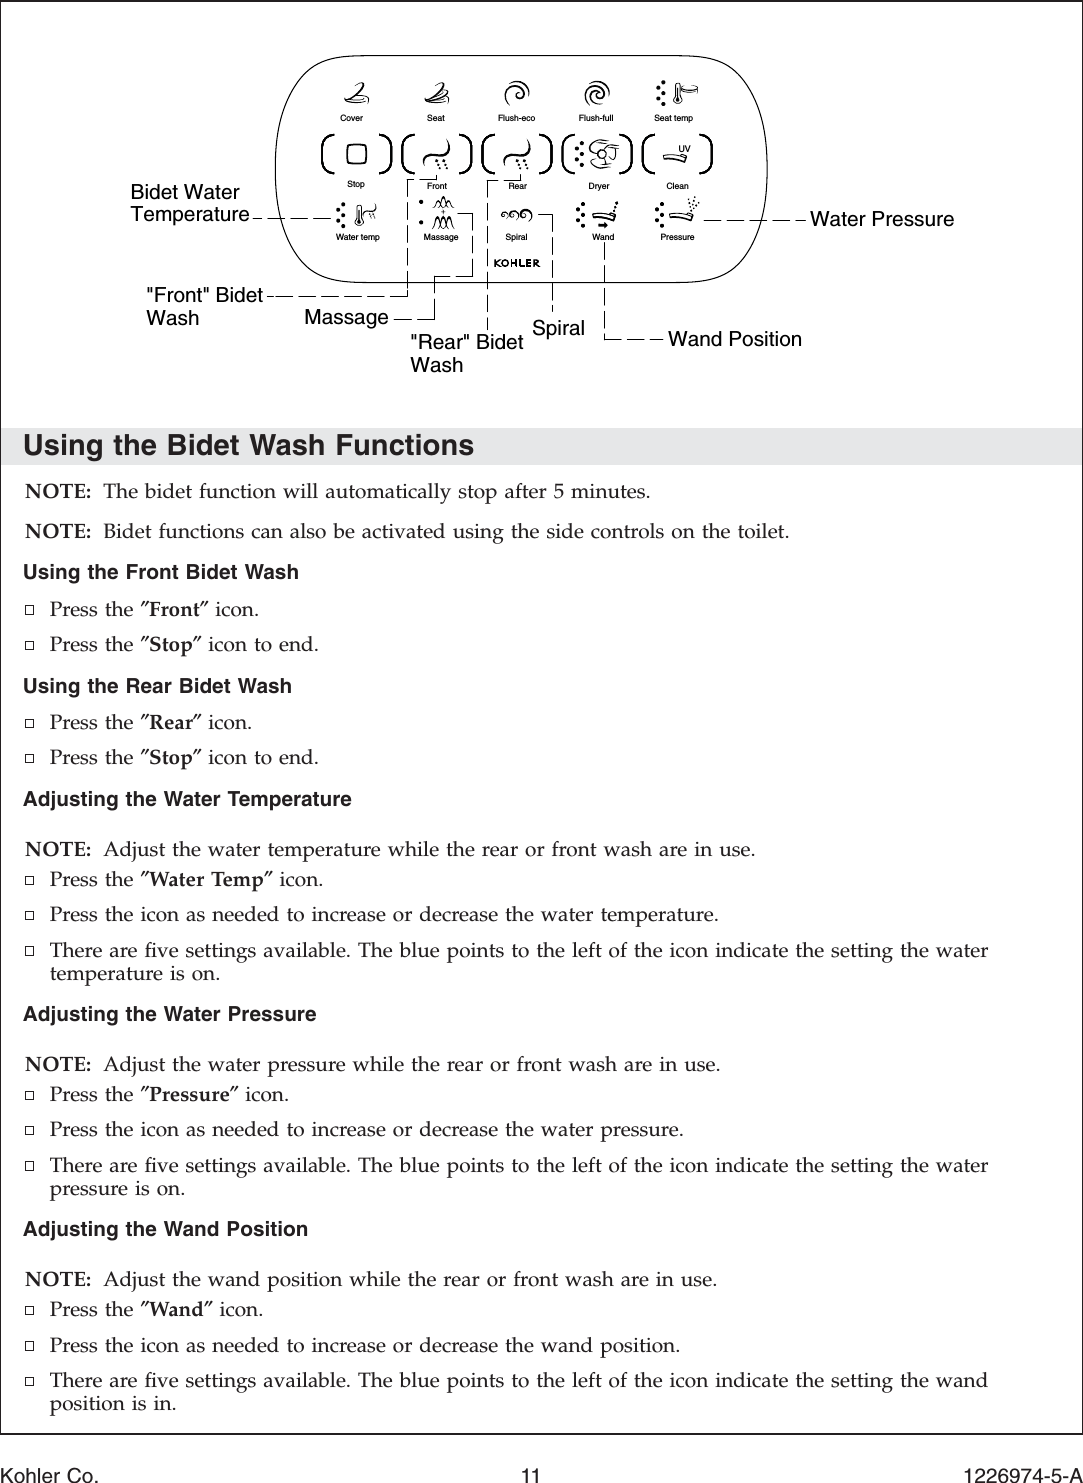 Using the Bidet Wash FunctionsNOTE: The bidet function will automatically stop after 5 minutes.NOTE: Bidet functions can also be activated using the side controls on the toilet.Using the Front Bidet WashPress the ″Front″icon.Press the ″Stop″icon to end.Using the Rear Bidet WashPress the ″Rear″icon.Press the ″Stop″icon to end.Adjusting the Water TemperatureNOTE: Adjust the water temperature while the rear or front wash are in use.Press the ″Water Temp″icon.Press the icon as needed to increase or decrease the water temperature.There are ﬁve settings available. The blue points to the left of the icon indicate the setting the watertemperature is on.Adjusting the Water PressureNOTE: Adjust the water pressure while the rear or front wash are in use.Press the ″Pressure″icon.Press the icon as needed to increase or decrease the water pressure.There are ﬁve settings available. The blue points to the left of the icon indicate the setting the waterpressure is on.Adjusting the Wand PositionNOTE: Adjust the wand position while the rear or front wash are in use.Press the ″Wand″icon.Press the icon as needed to increase or decrease the wand position.There are ﬁve settings available. The blue points to the left of the icon indicate the setting the wandposition is in.Wand PositionSpiralWater PressureMassage&quot;Front&quot; BidetWash &quot;Rear&quot; BidetWashBidet WaterTemperatureSeat temp Flush-fullFlush-ecoSeatClean Dryer RearFrontPressureandWSpiralMassageater tempWStop Cover UVKohler Co. 11 1226974-5-A